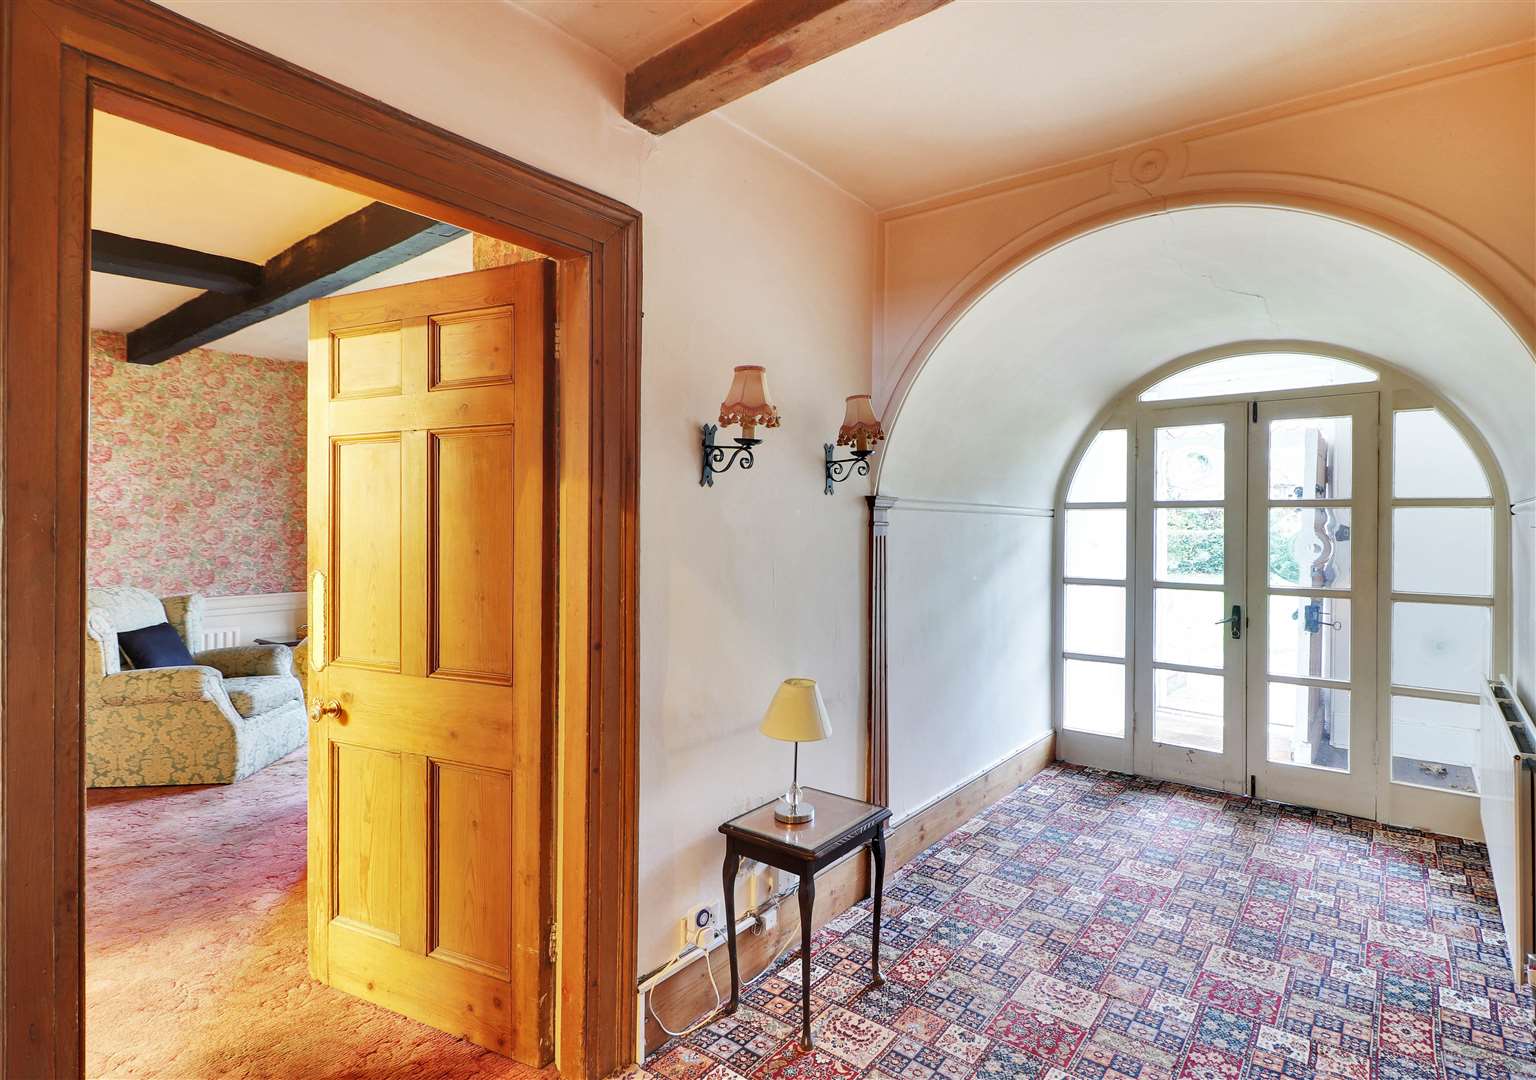 The property retains several period features throughout. Photo: BTF Partnership